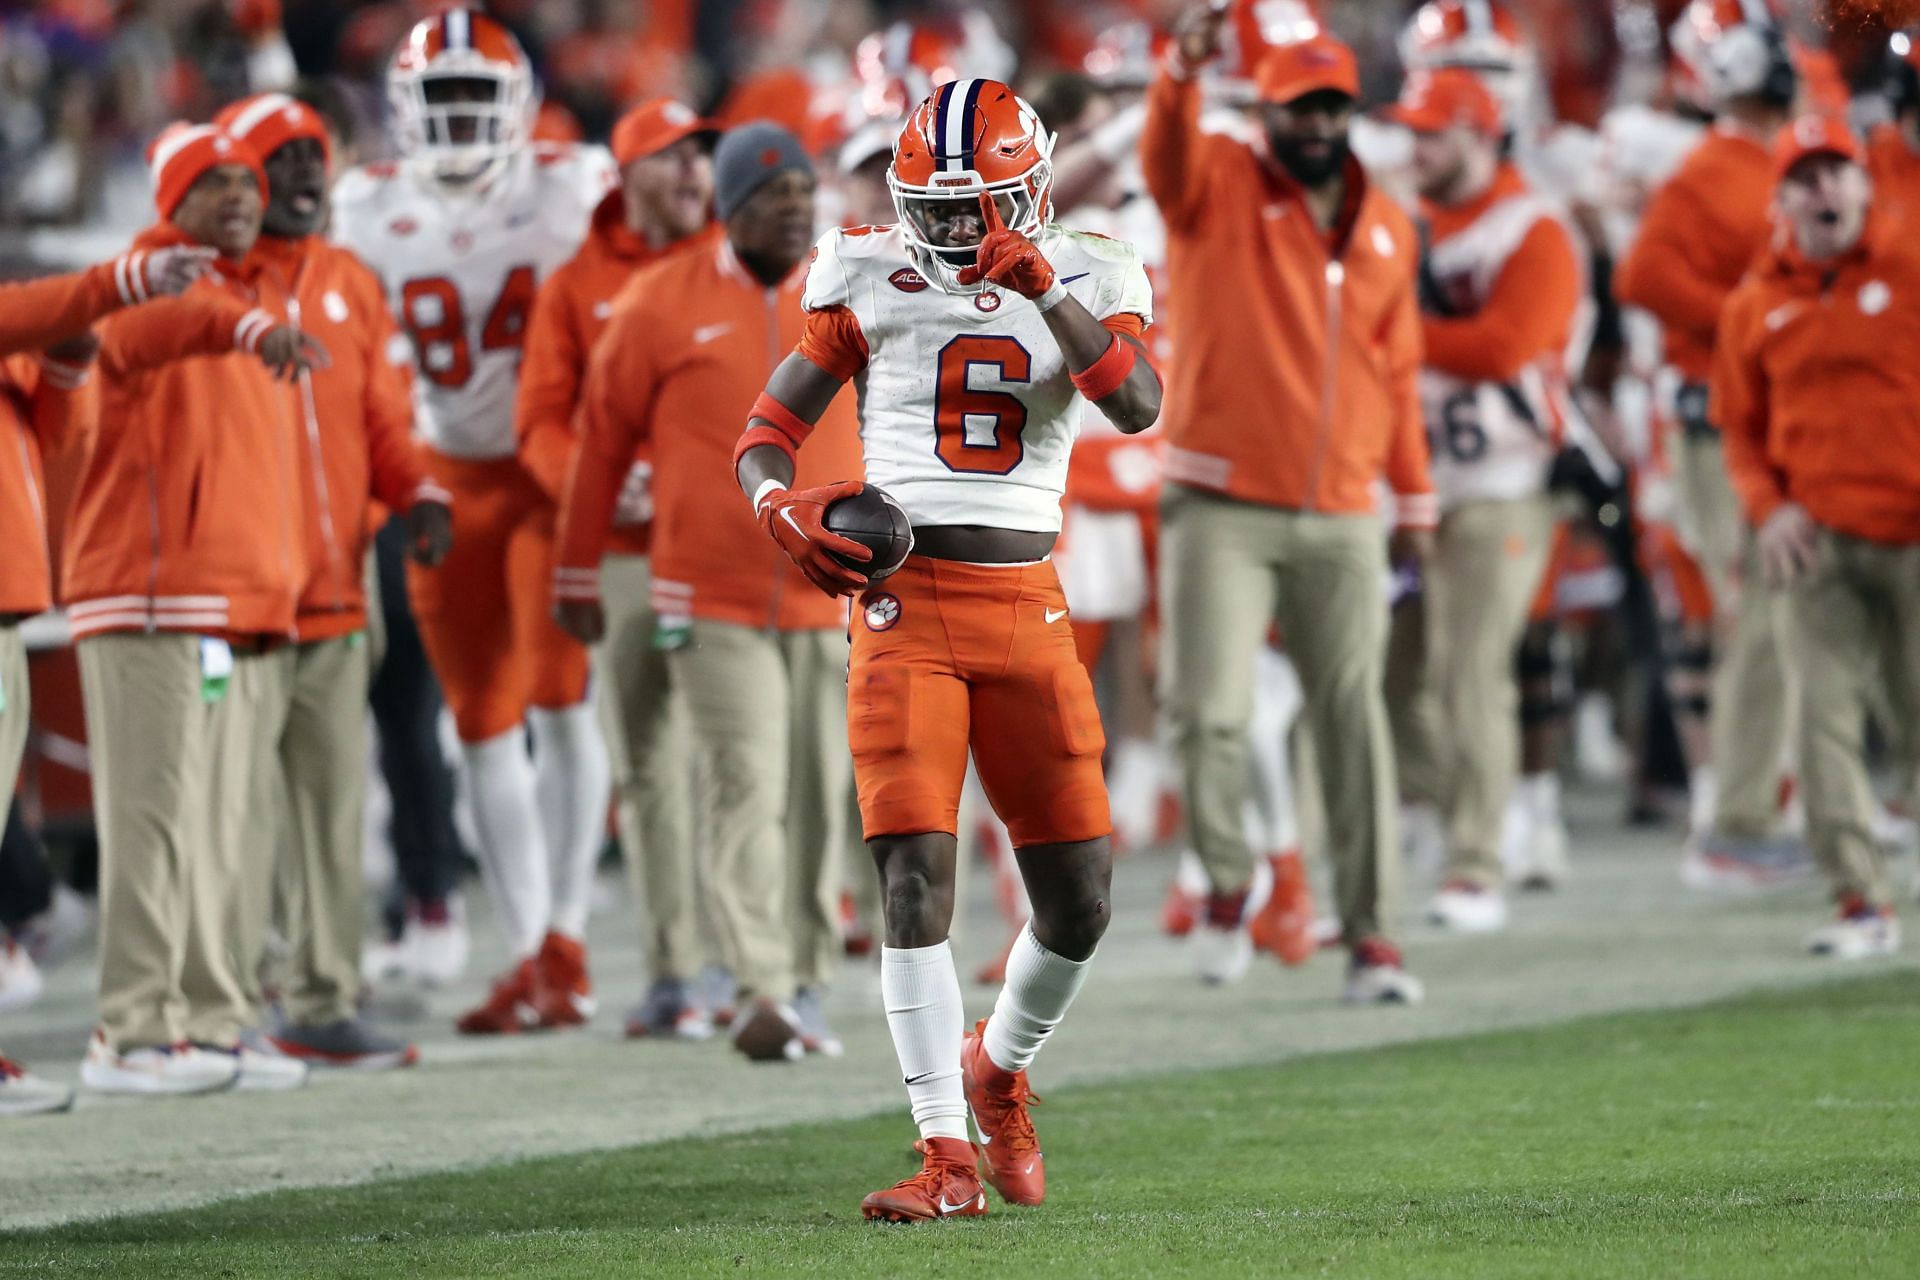 Clemson South Carolina Football: Clemson wide receiver Tyler Brown (6) signals a first down after his 39-yard reception during the second half of an NCAA college football game against South Carolina, Saturday, Nov. 25, 2023, in Columbia, S.C. (AP Photo/Artie Walker Jr.)